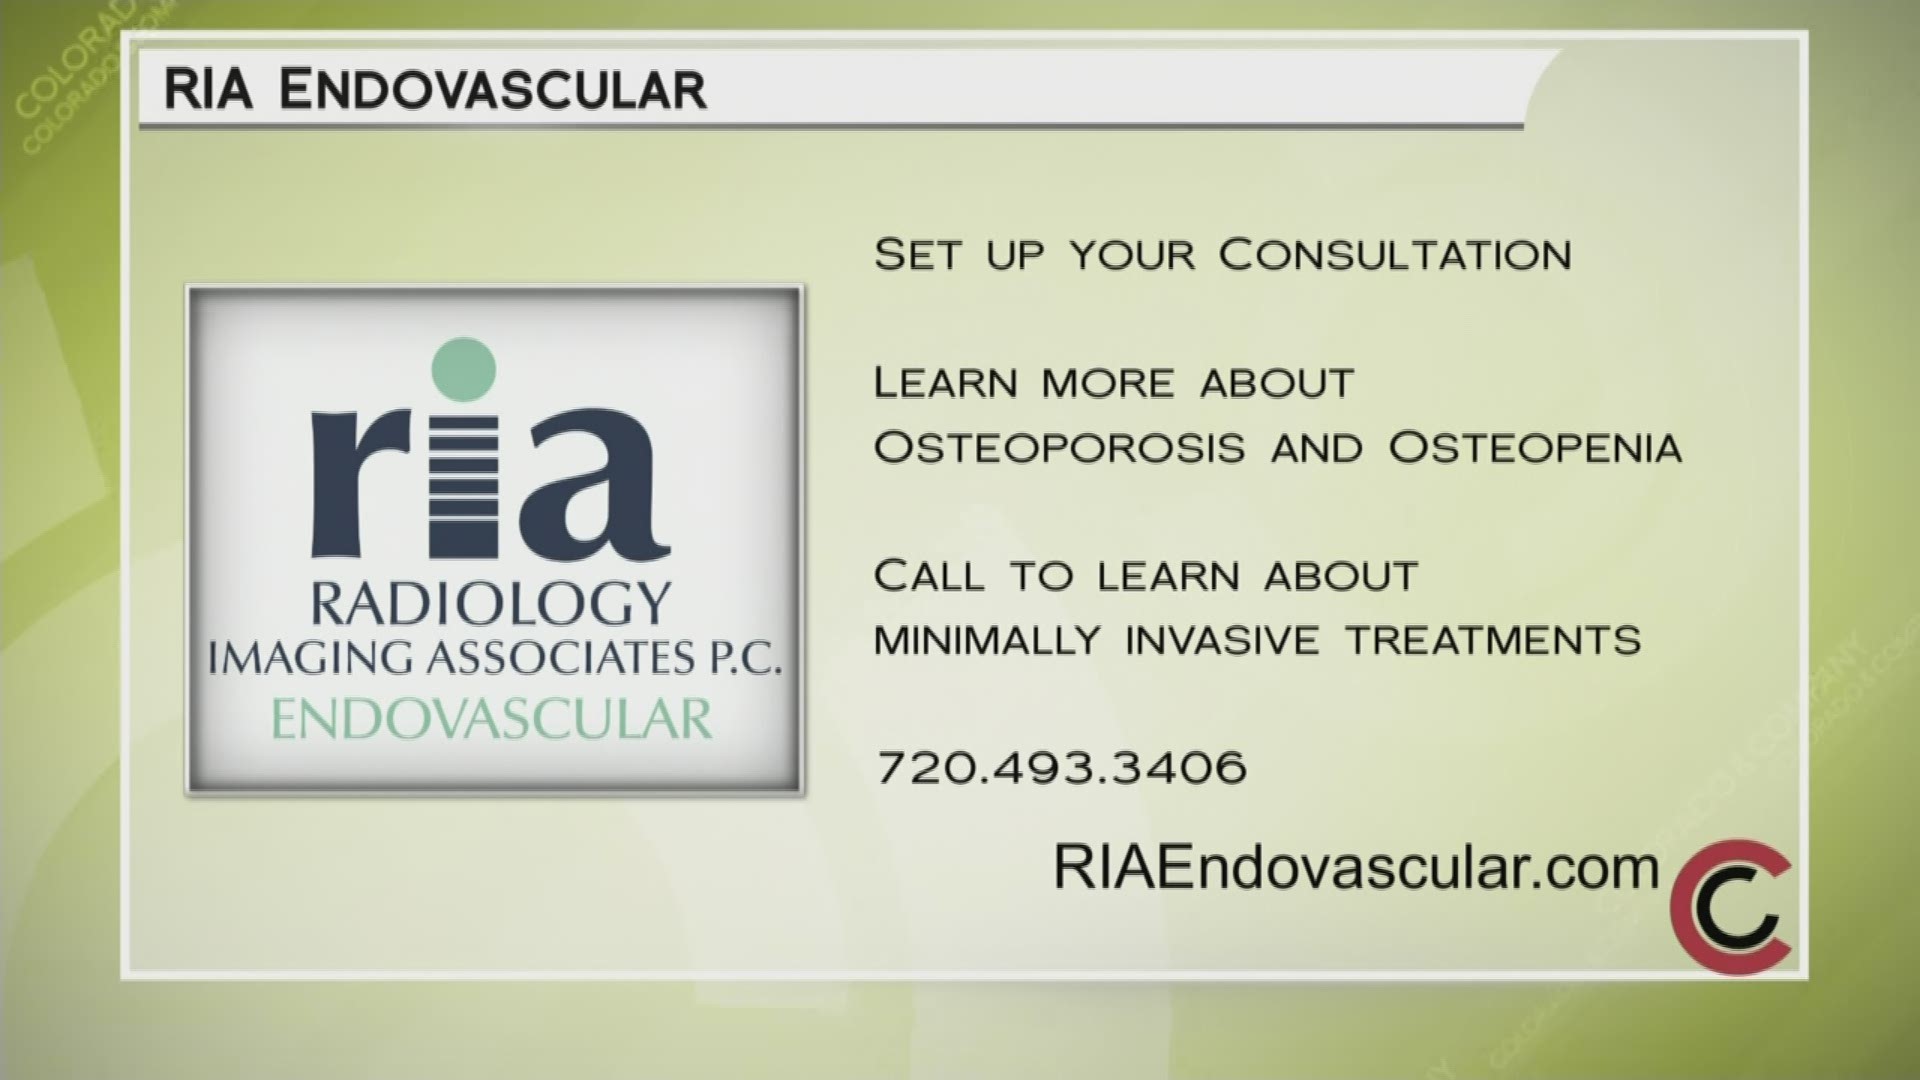 If you feel like you're suffering from any of the symptoms talked about in this segment, call 720.493.3406 or visit RIAEndovascular.com to see how they can help.